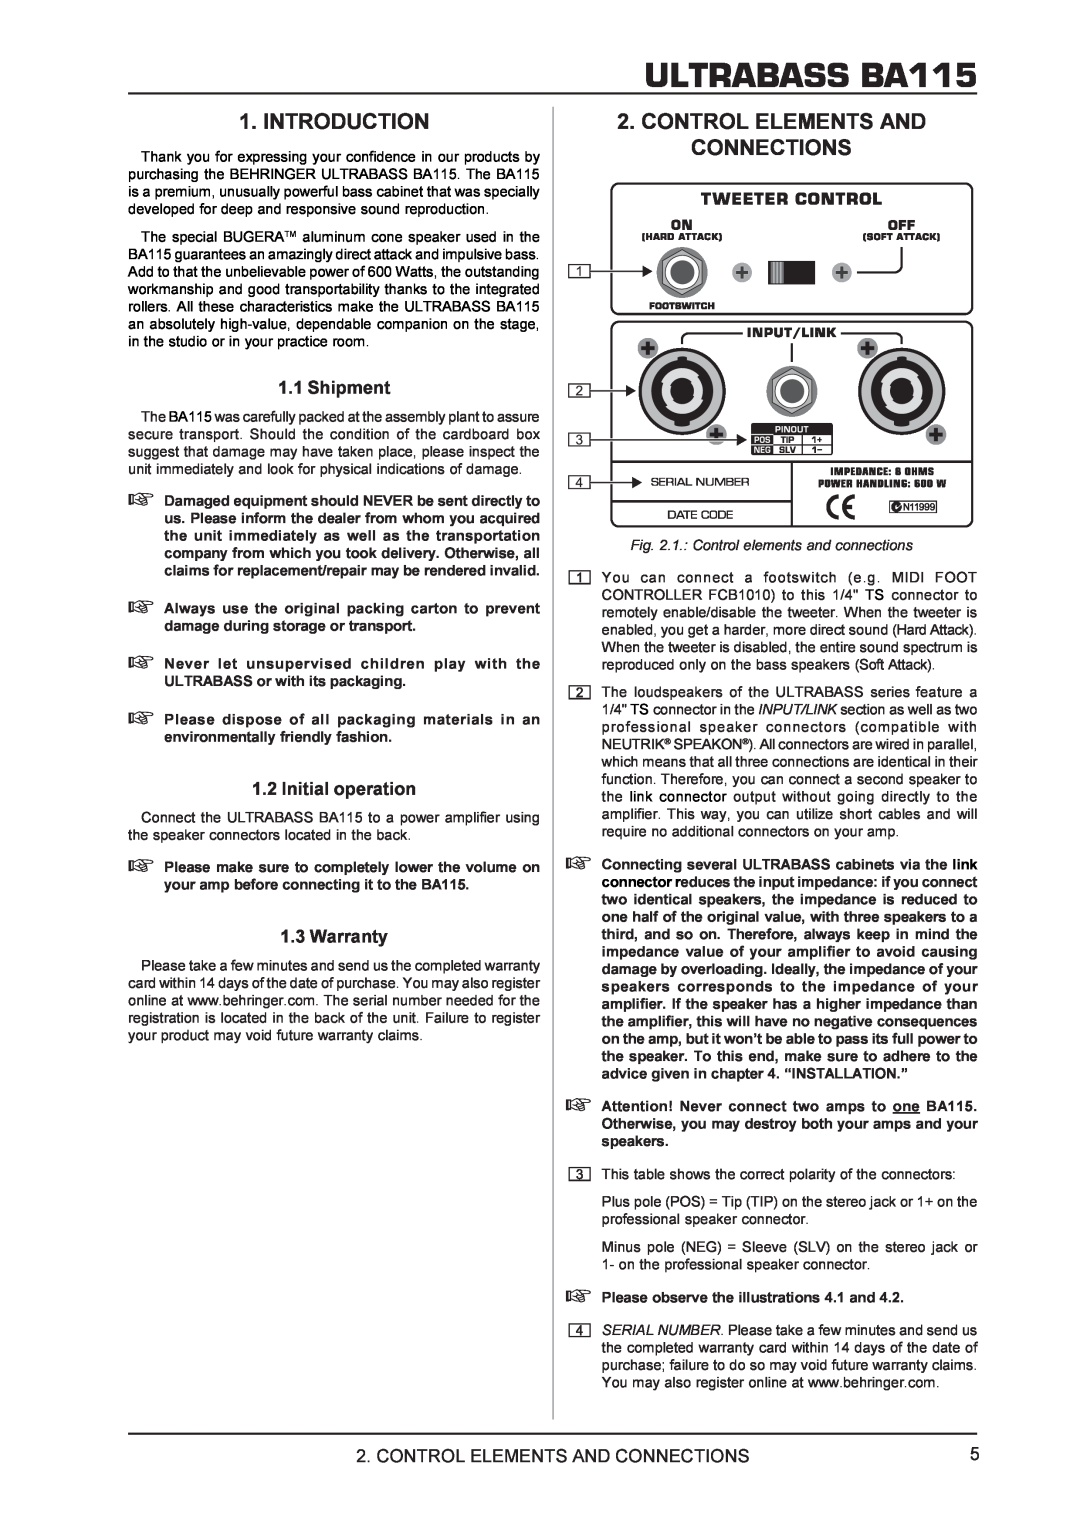 Behringer manual Introduction, Control Elements And Connections, ULTRABASS BA115, Shipment, Initial operation, Warranty 